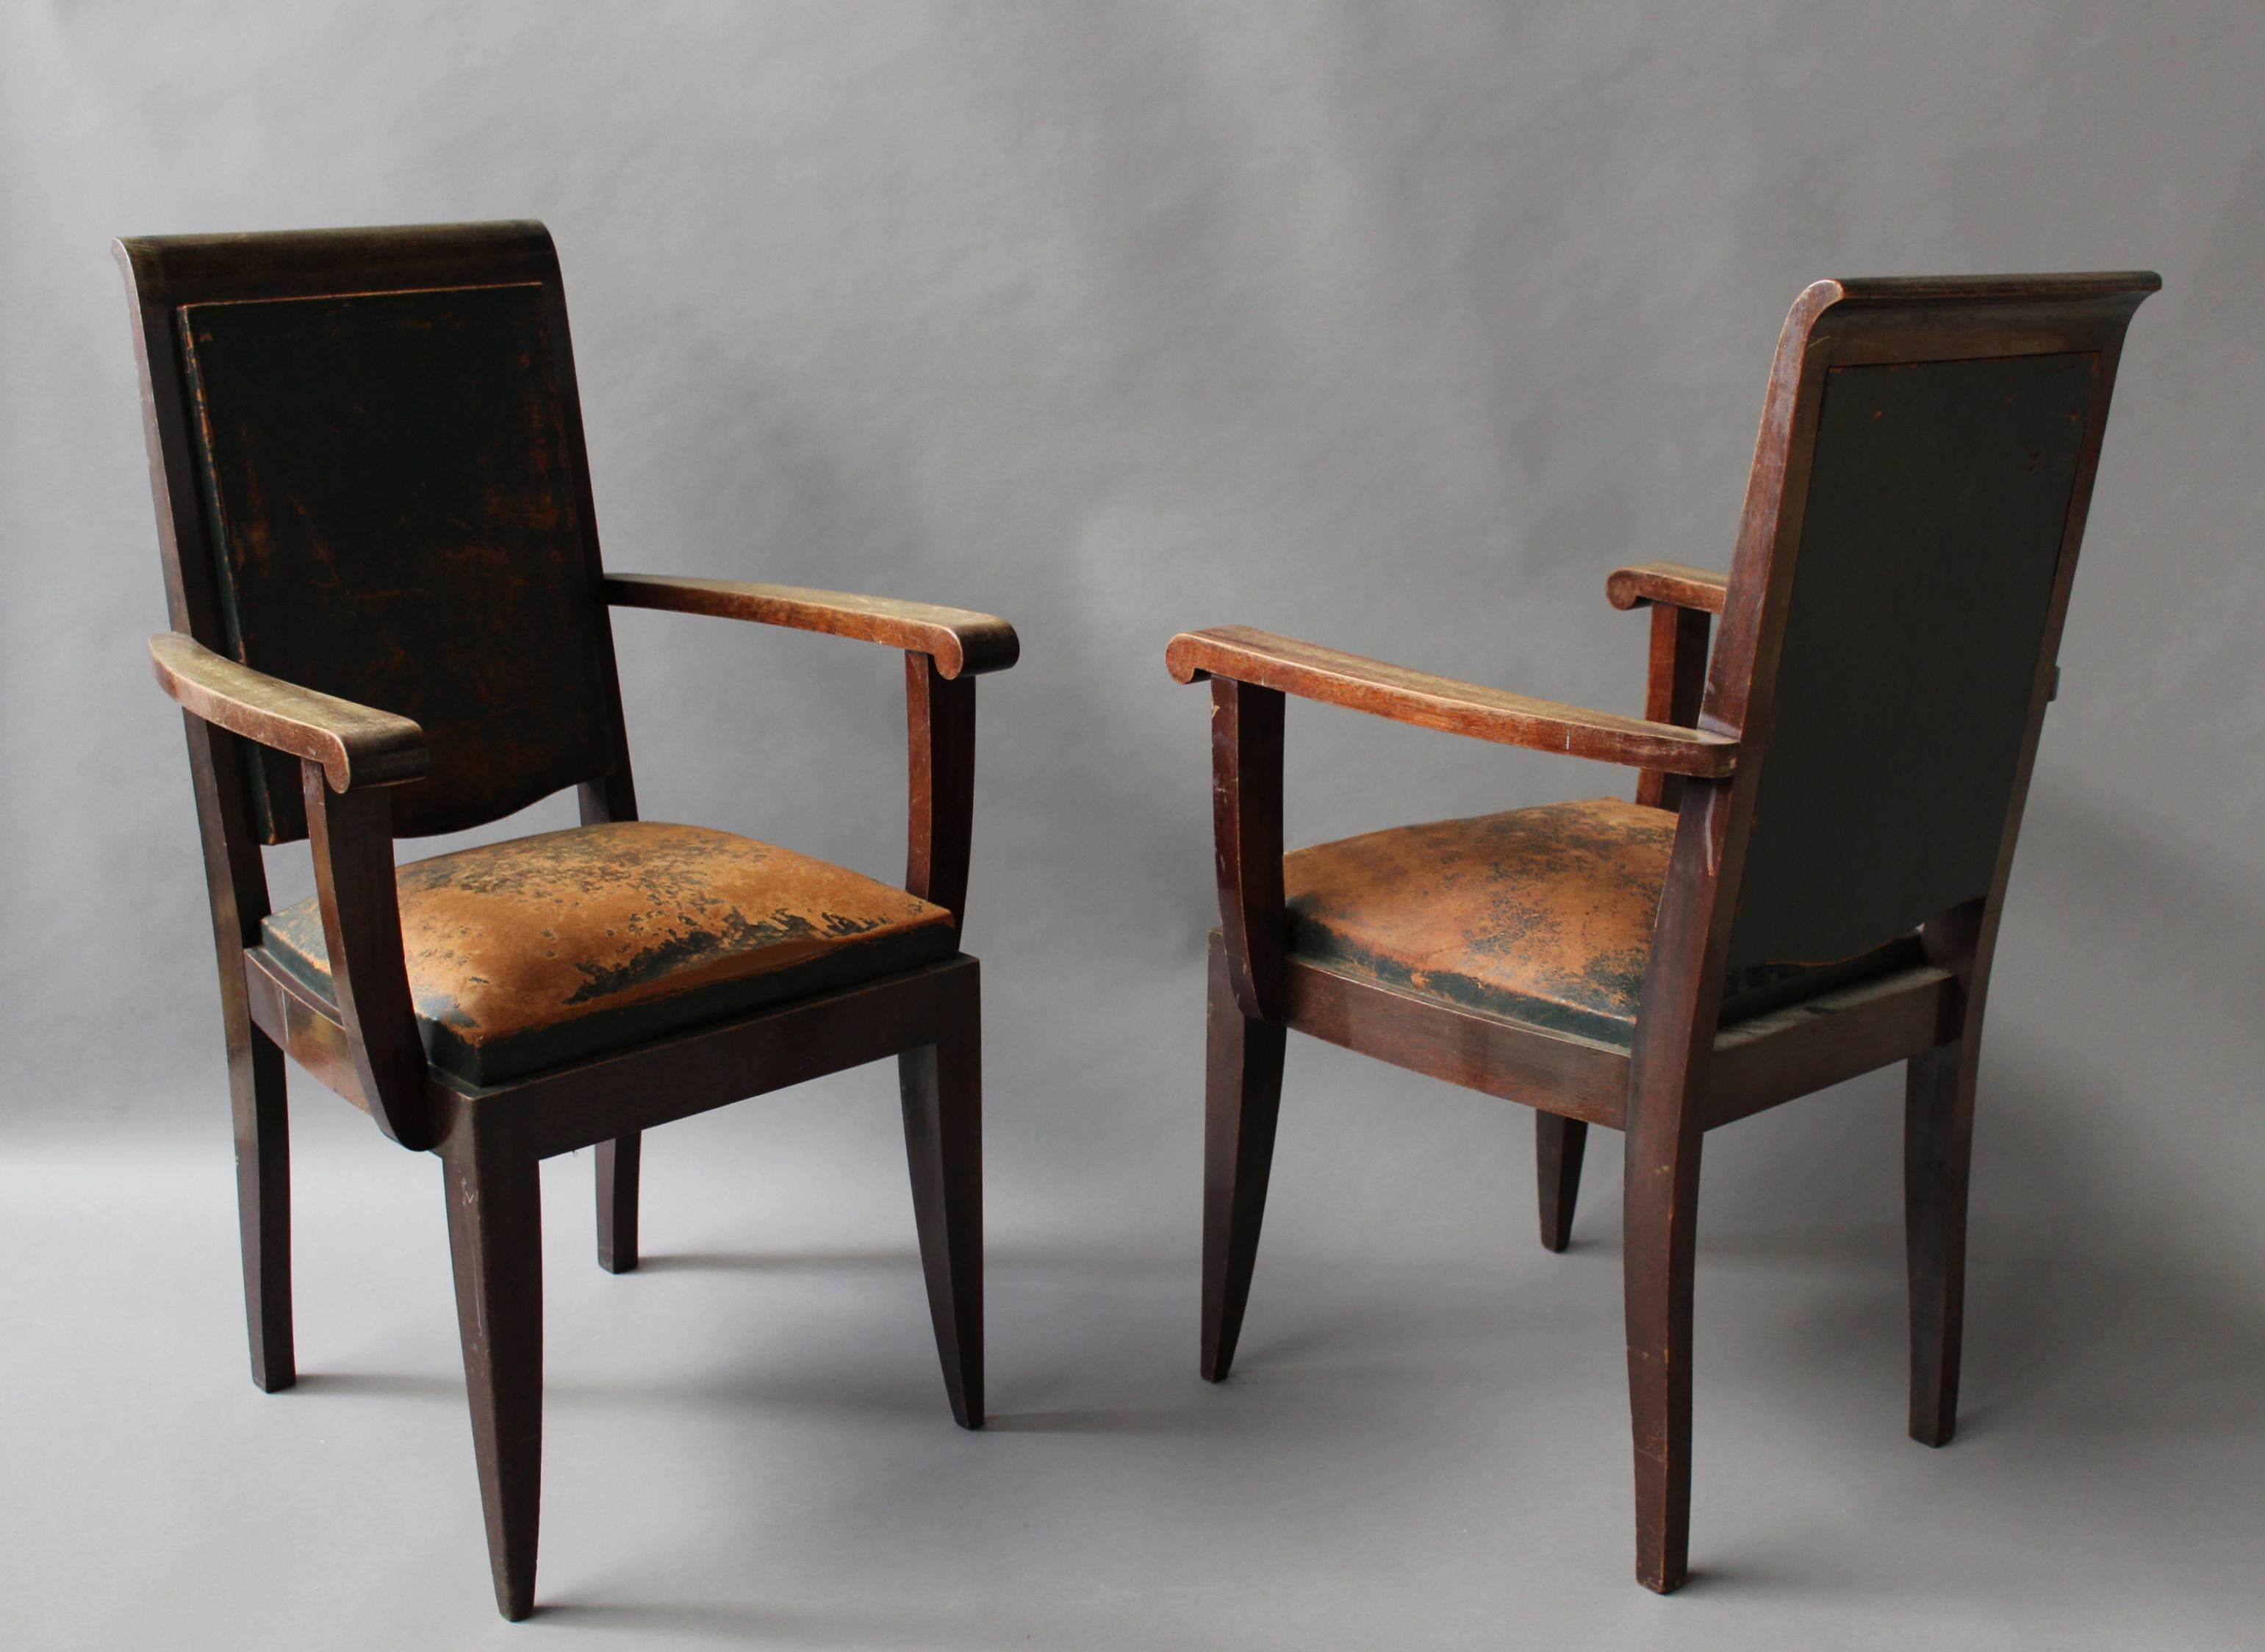 A set of 10 fine French Art Deco solid mahogany dining chairs by Gaston Poisson (8 side and 2 arm).
Dimension of the arm chairs are H 38 1/8